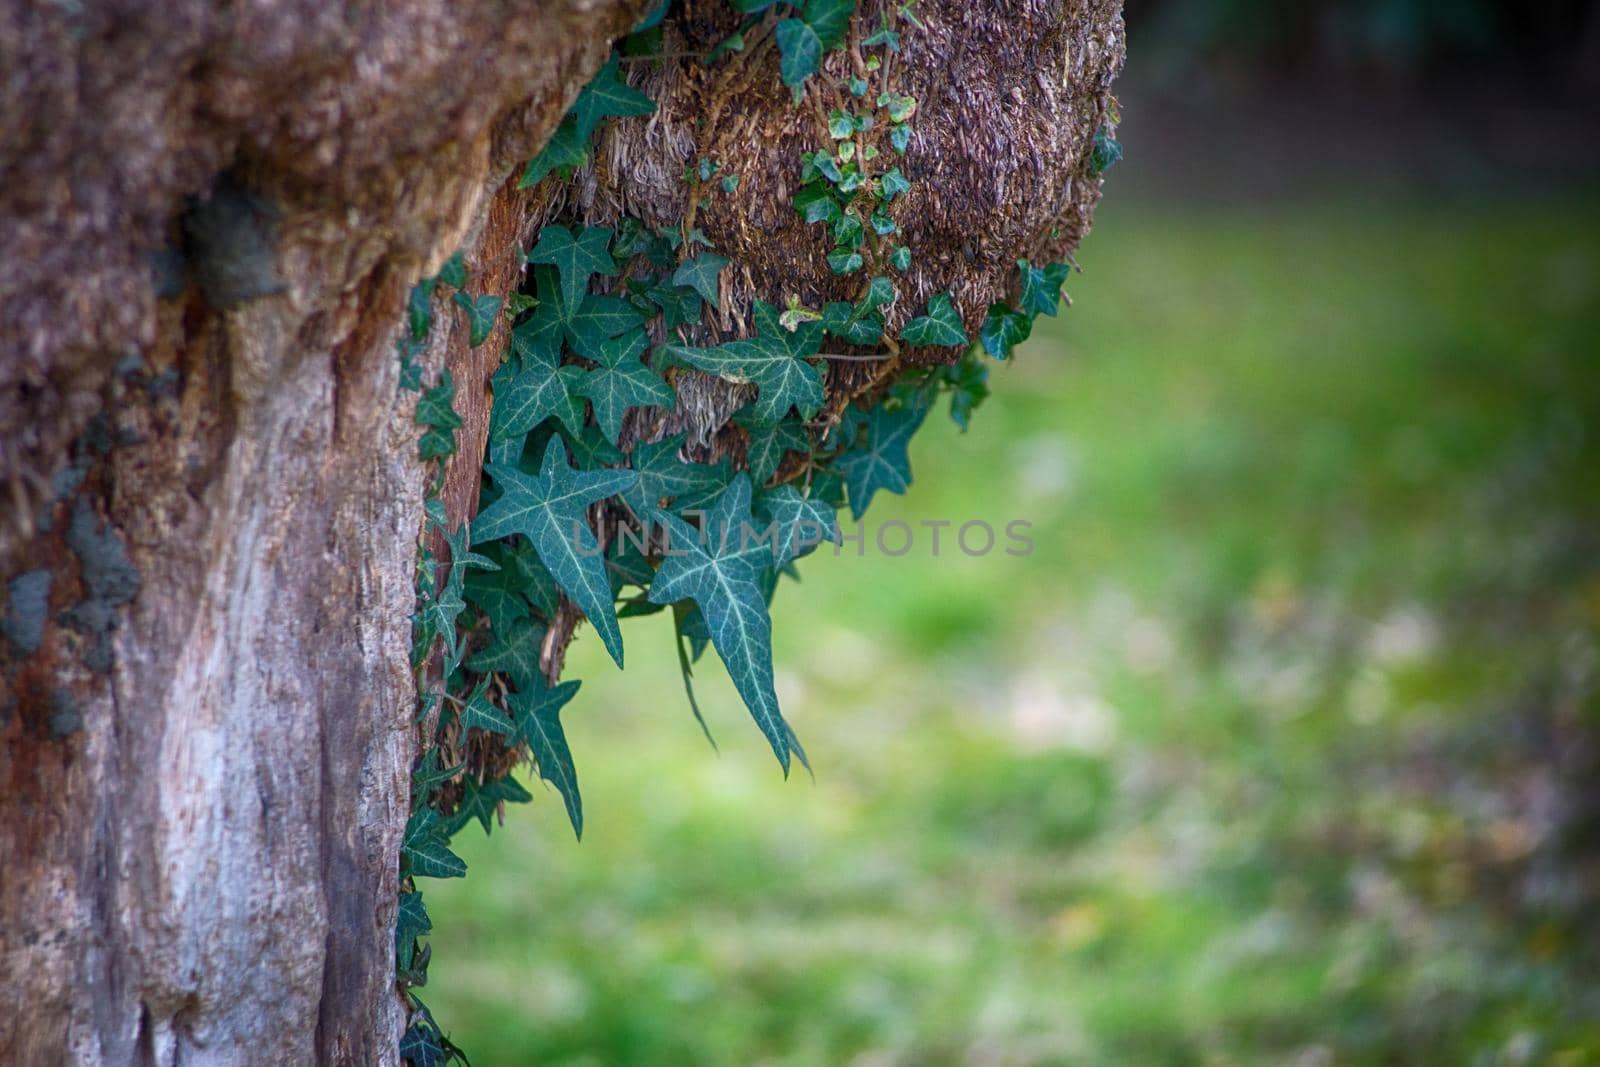 Dangling ivy on the trunk of an old tree on blurred green background